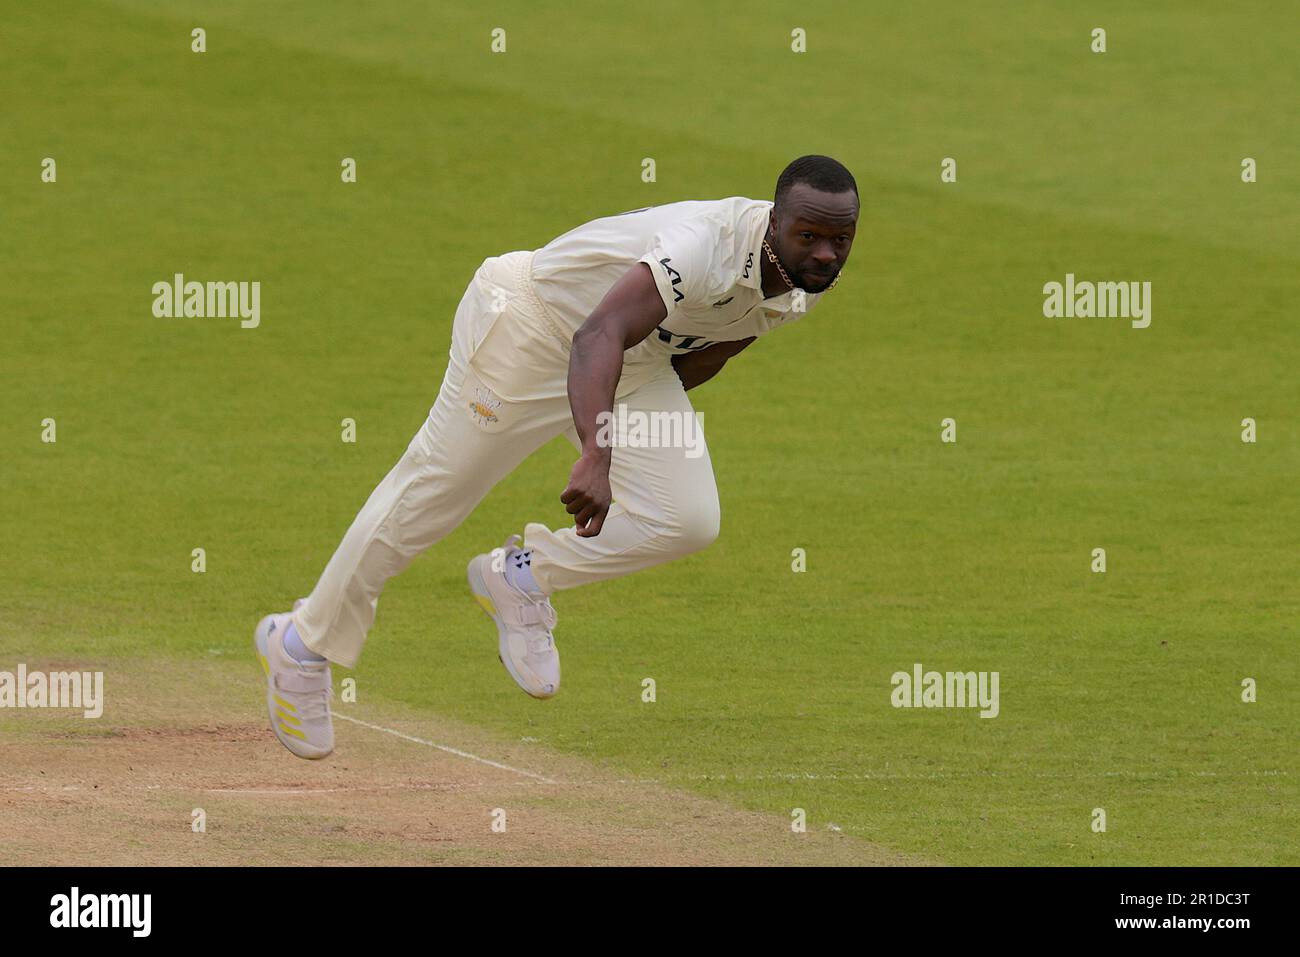 London, UK. 13 May, 2023. London, UK. Surrey’s Kemar Roach bowling as Surrey take on Middlesex in the County Championship at the Kia Oval, day three David Rowe/Alamy Live News Credit: David Rowe/Alamy Live News Stock Photo